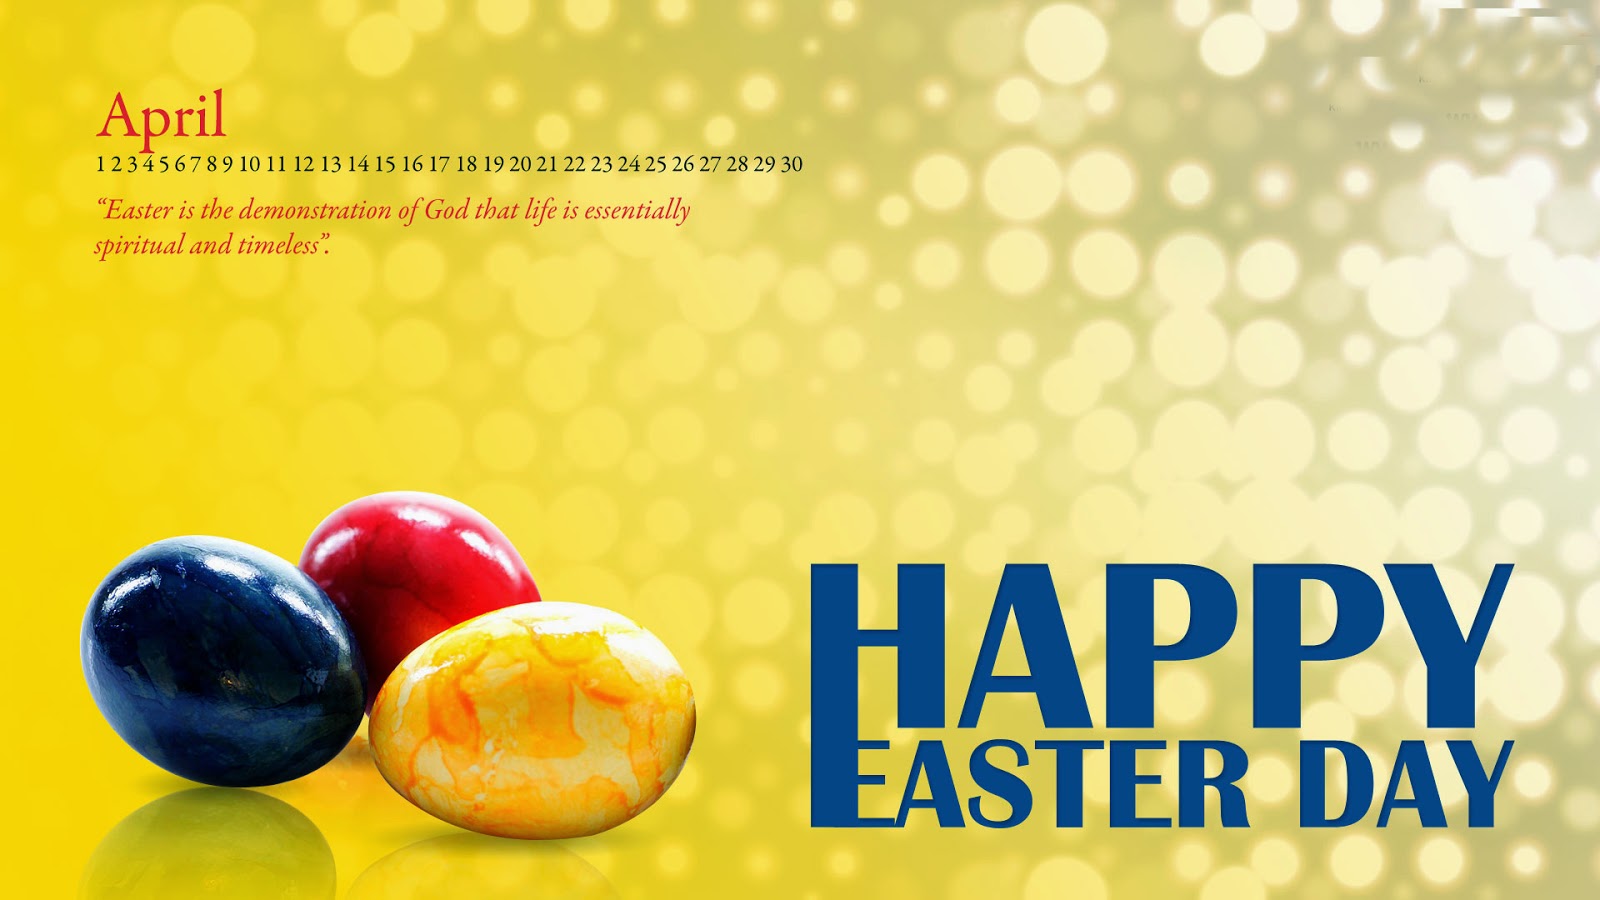 Happy-Easter-Wishes-Wallpaper1